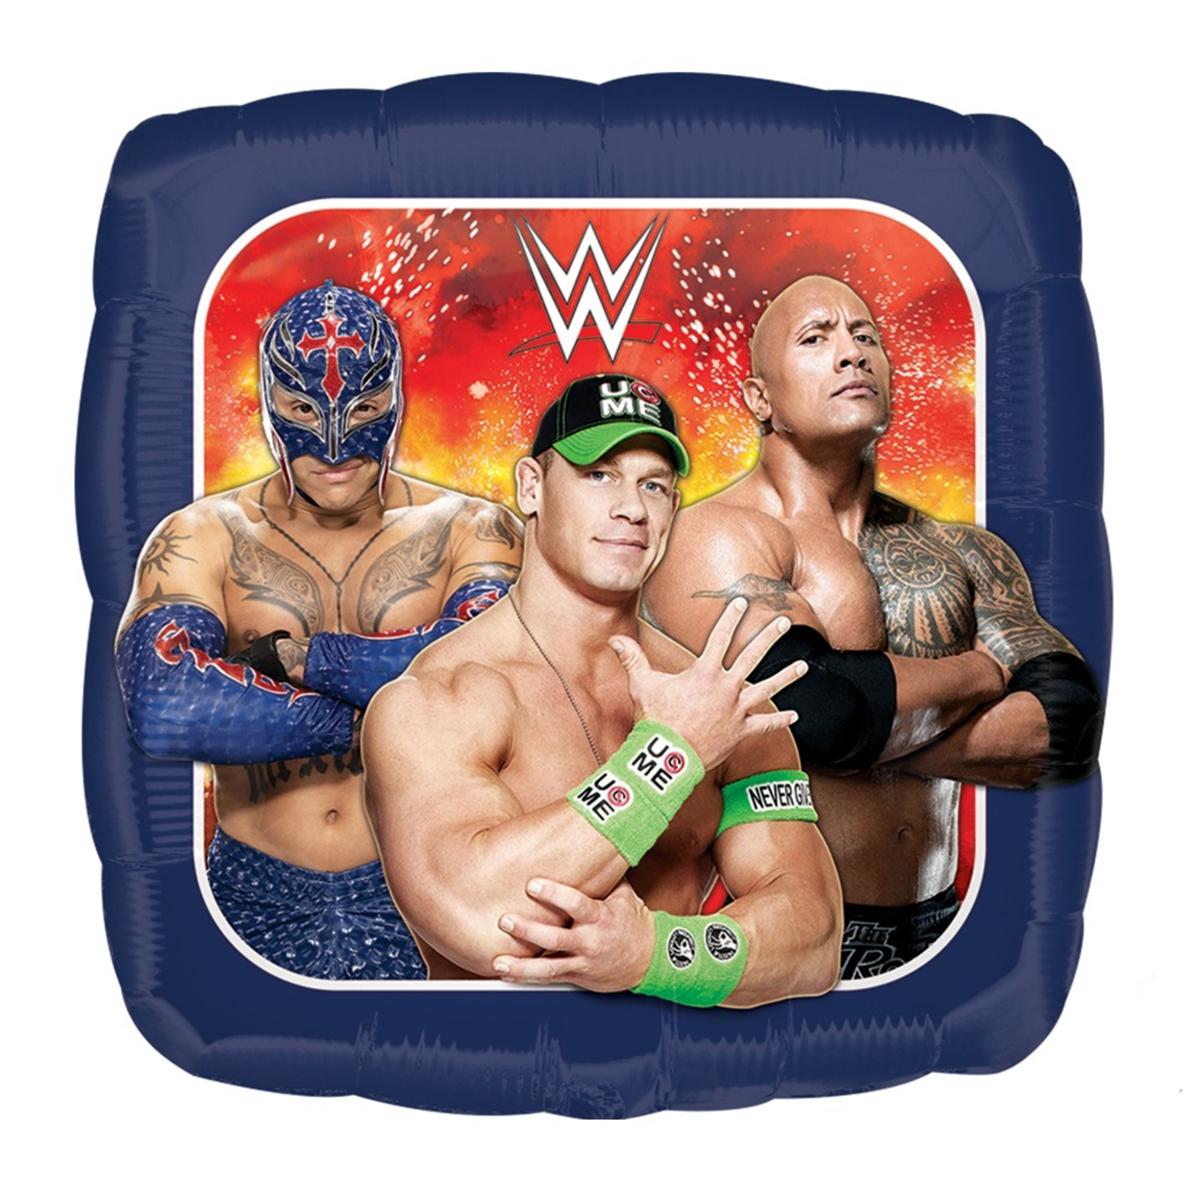 WWE Group Square Foil Balloon 18in Balloons & Streamers - Party Centre